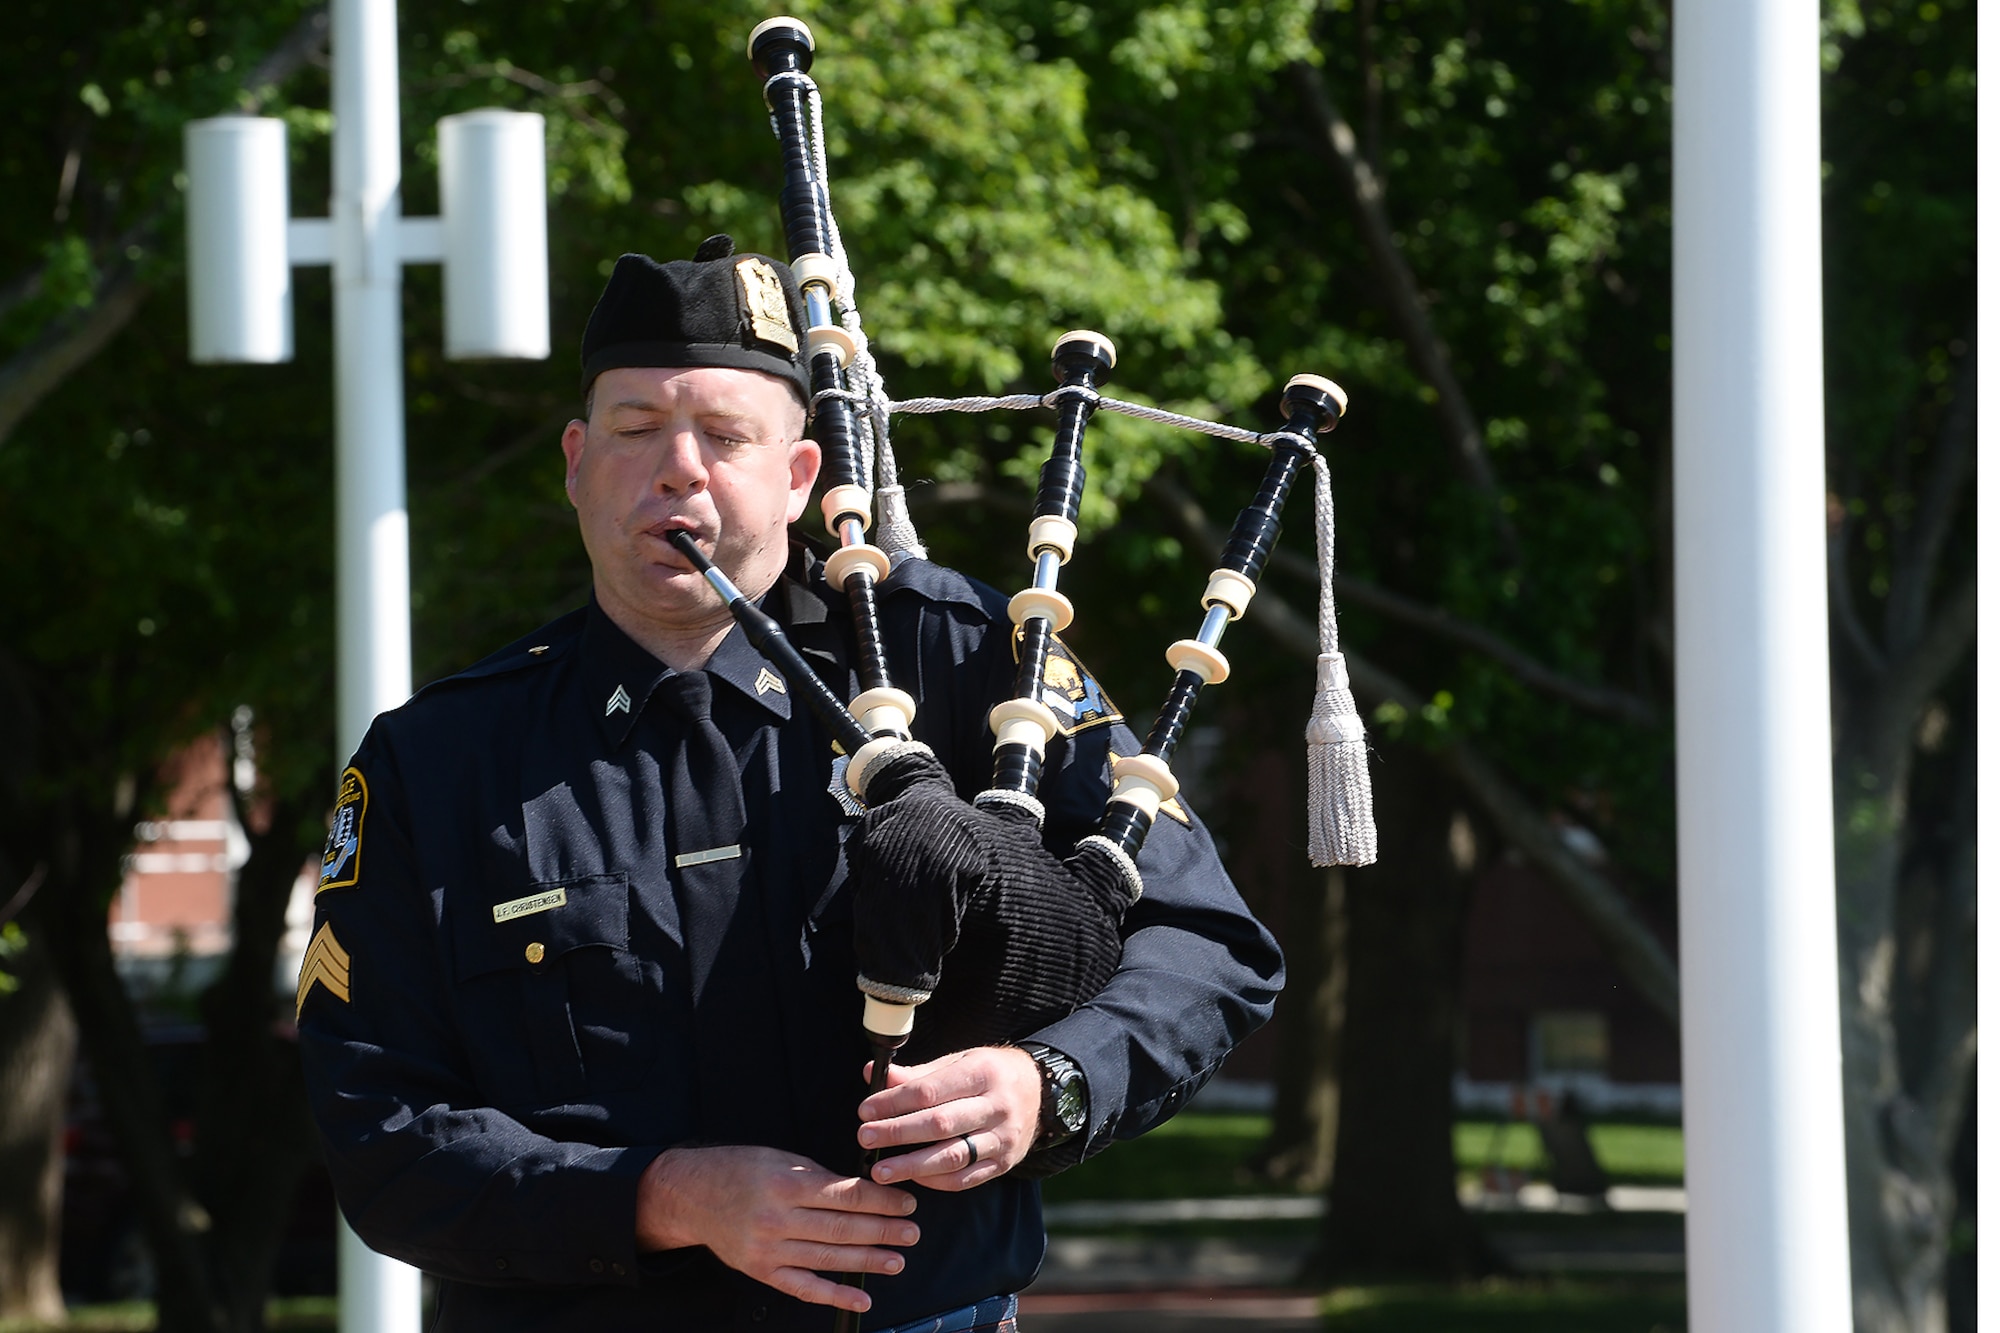 Sgt. Jeremy Christensen, Omaha Police Department, plays “Amazing Grace” on his bag pipes during a retreat ceremony honoring Police Week May 17, 2018, at Offutt Air Force Base, Nebraska. Offutt’s Police Week events are a time where military members, their families and communities celebrate police officers and security forces members everywhere. (U.S. Air Force photo by Charles J. Haymond)